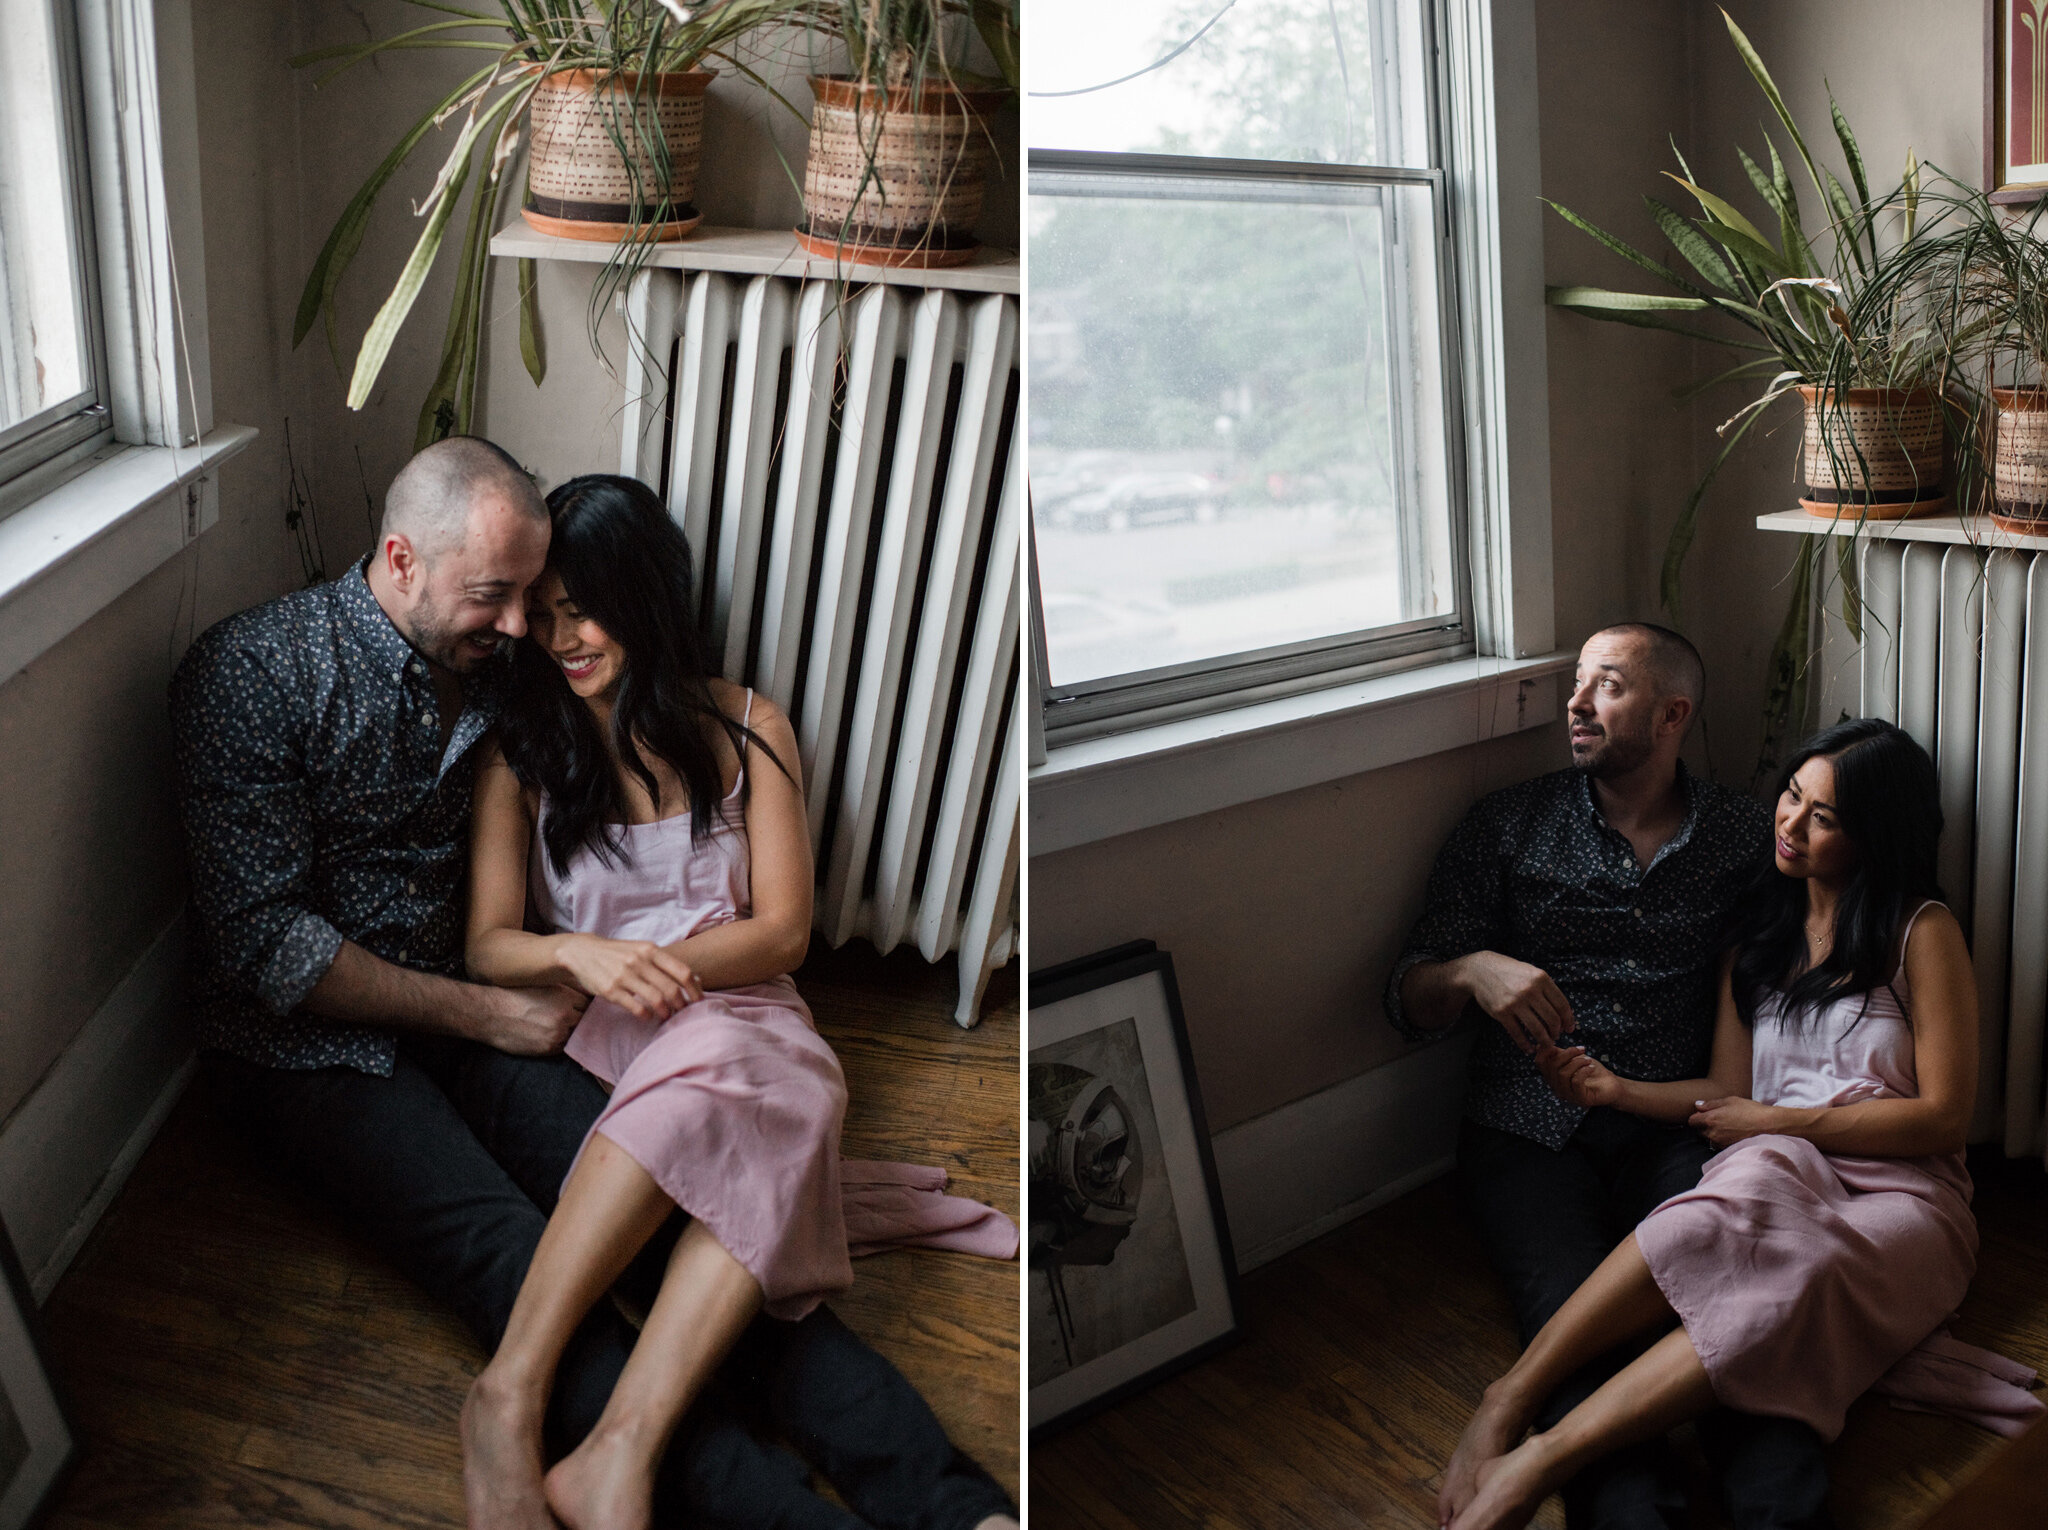 976-indoors-engagement-shoot-toronto-downtown-apartment-couples-photography-intimate.jpg